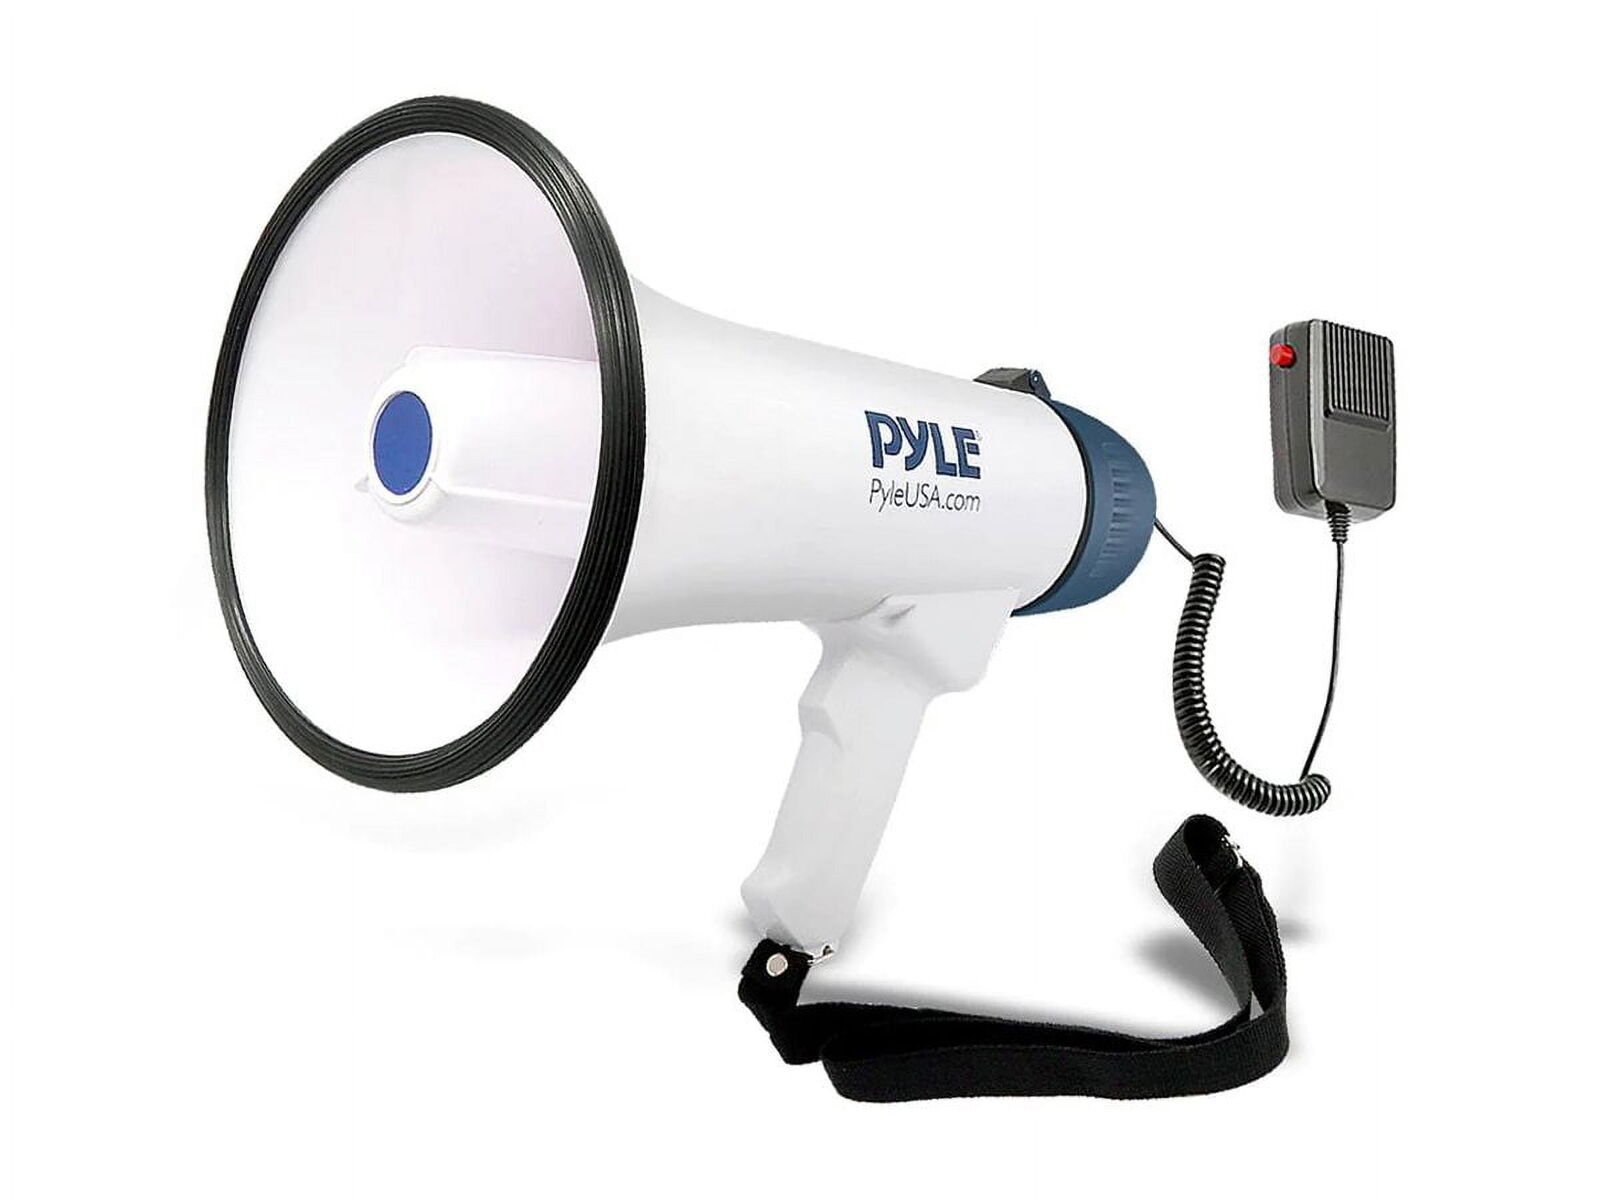 Pyle Pro Pmp45r 40-watt Professional Dynamic Megaphone Does not apply Does not apply